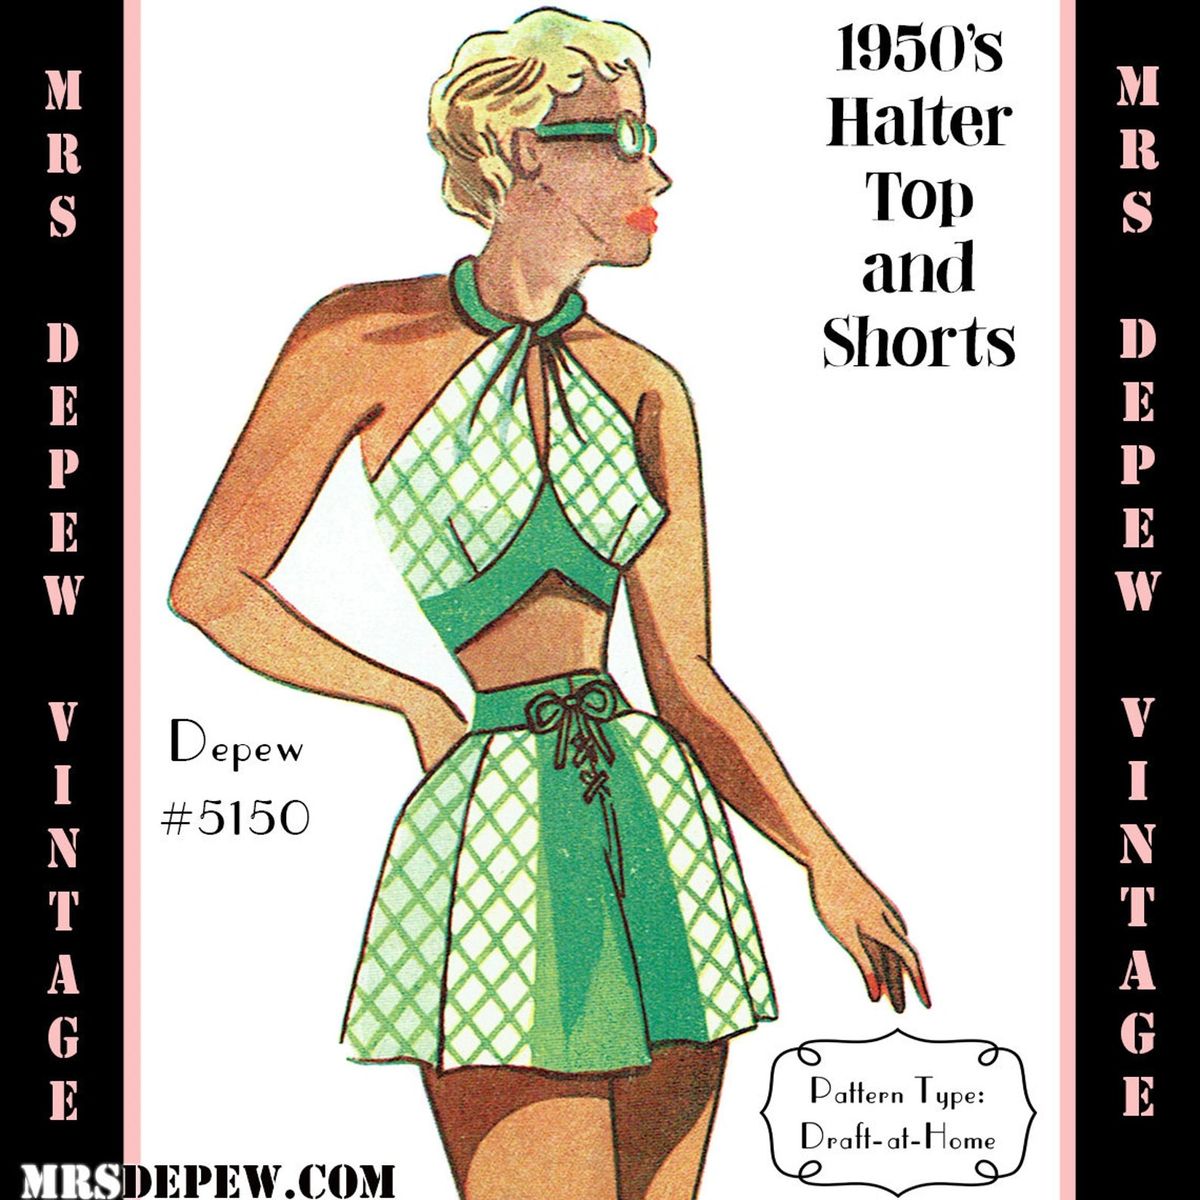 D-A-H Vintage Sewing Pattern 1950s Halter Bra Top & Shorts Depew 5150 in  Any Size - PLUS Size Included